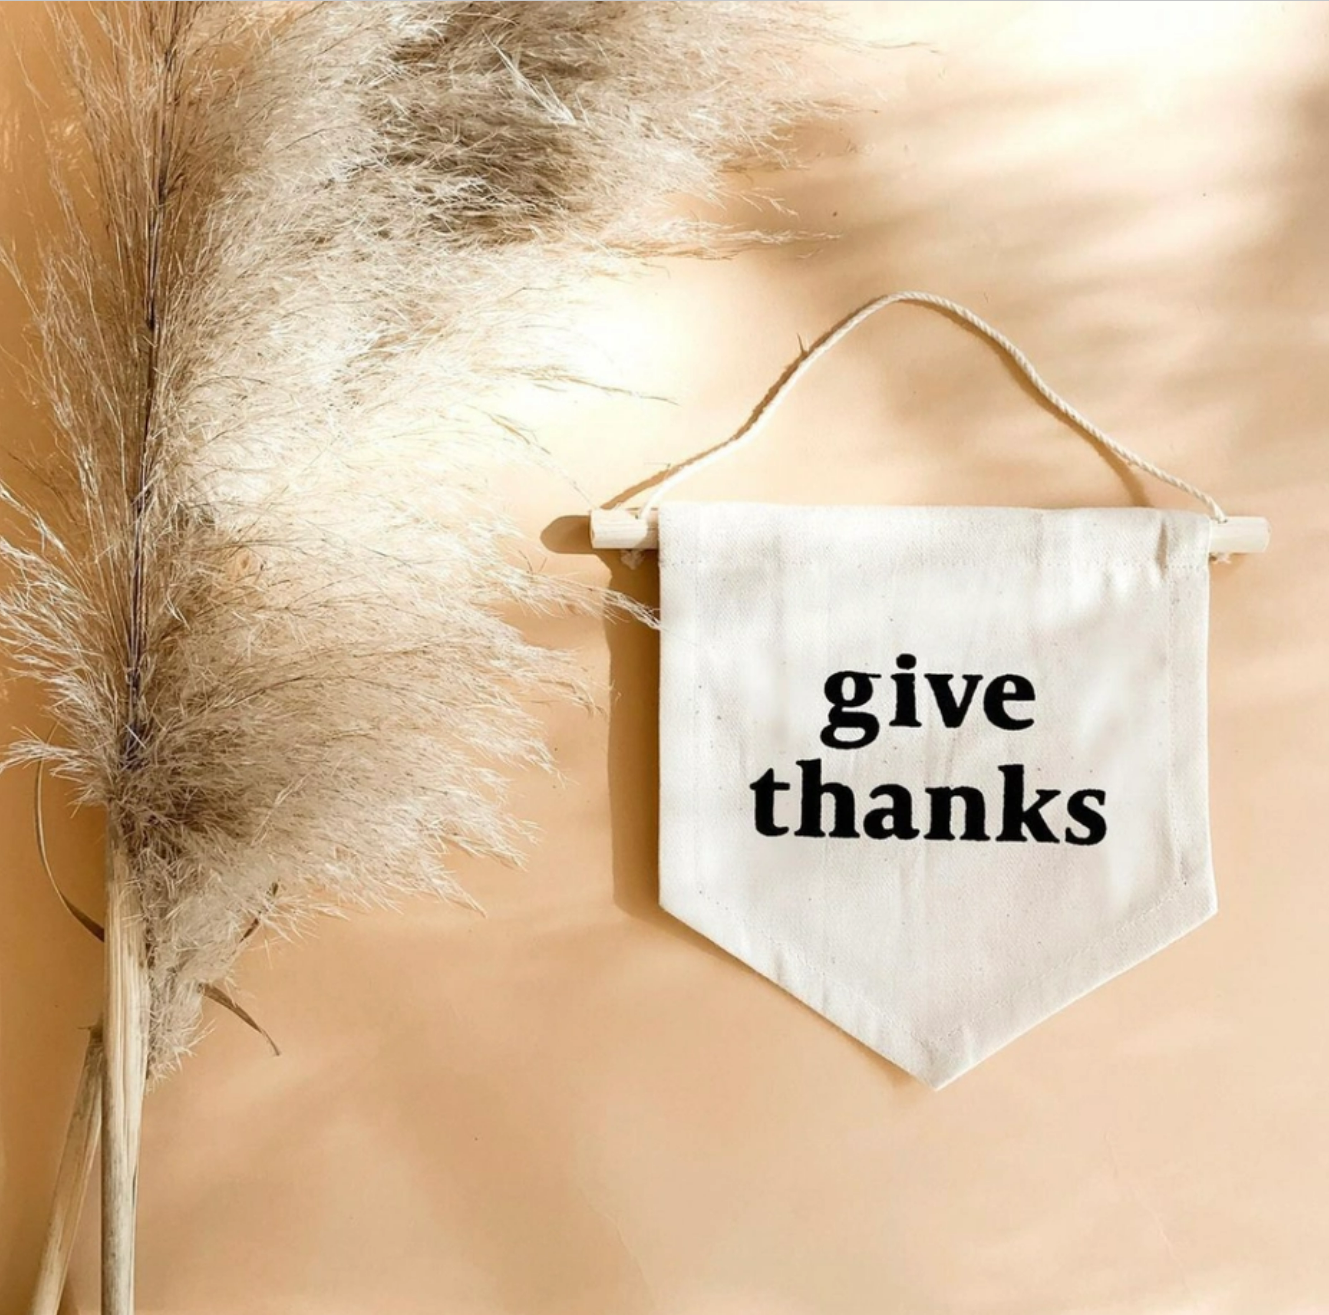 Imani Collective Décor "Give Thanks" Hang Sign by Imani Collective Handmade Organic Canvas Hang Sign - Sweet as Pie | Fall & Thanksgiving Kids Decor